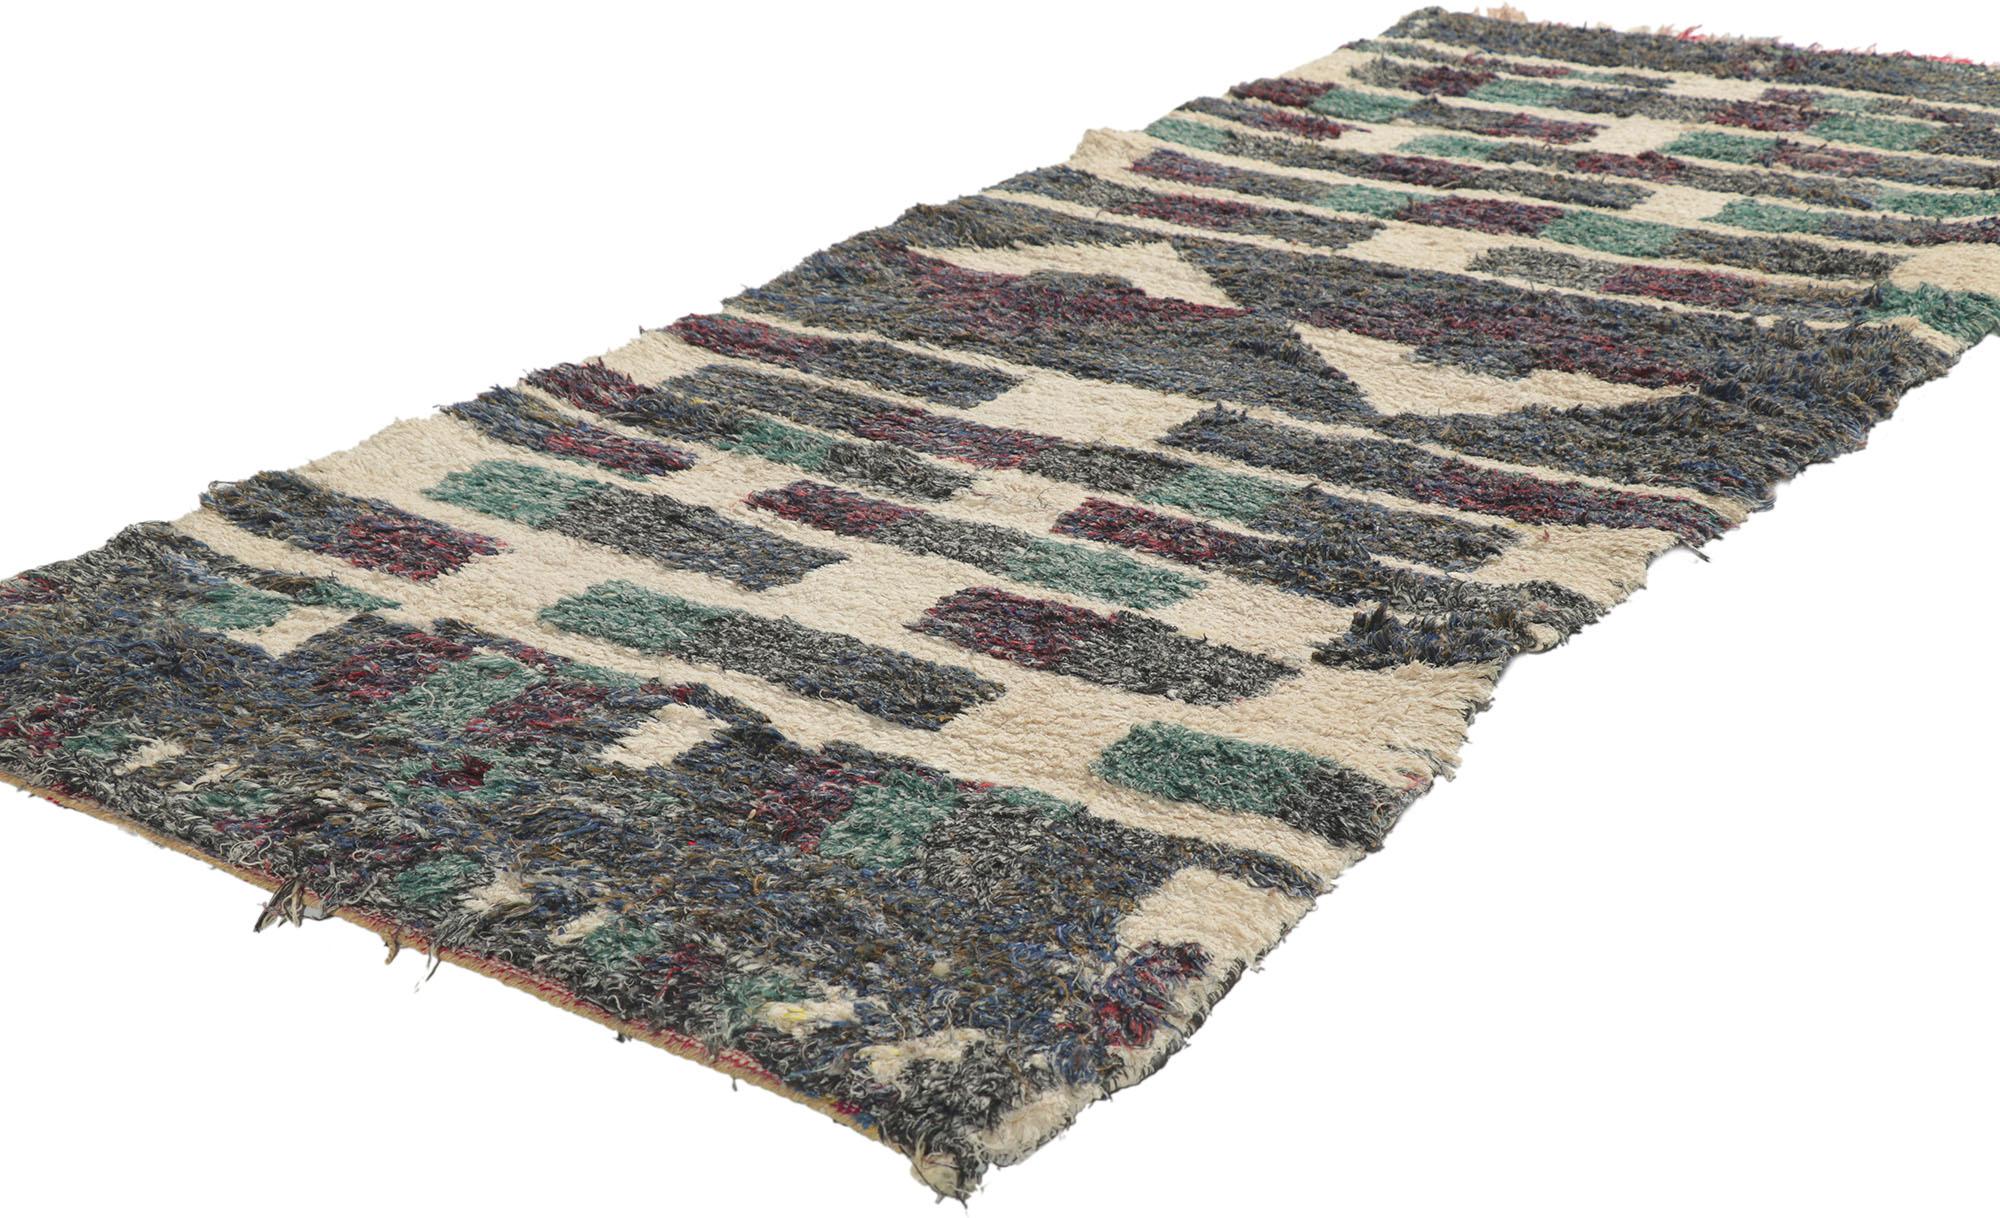 21602 vintage Berber Moroccan rug 02'08 x 05'11. Showcasing a bold expressive tribal design, incredible detail and texture, this hand knotted wool vintage Berber Moroccan Azilal rug is a captivating vision of woven beauty. The eye-catching geometric